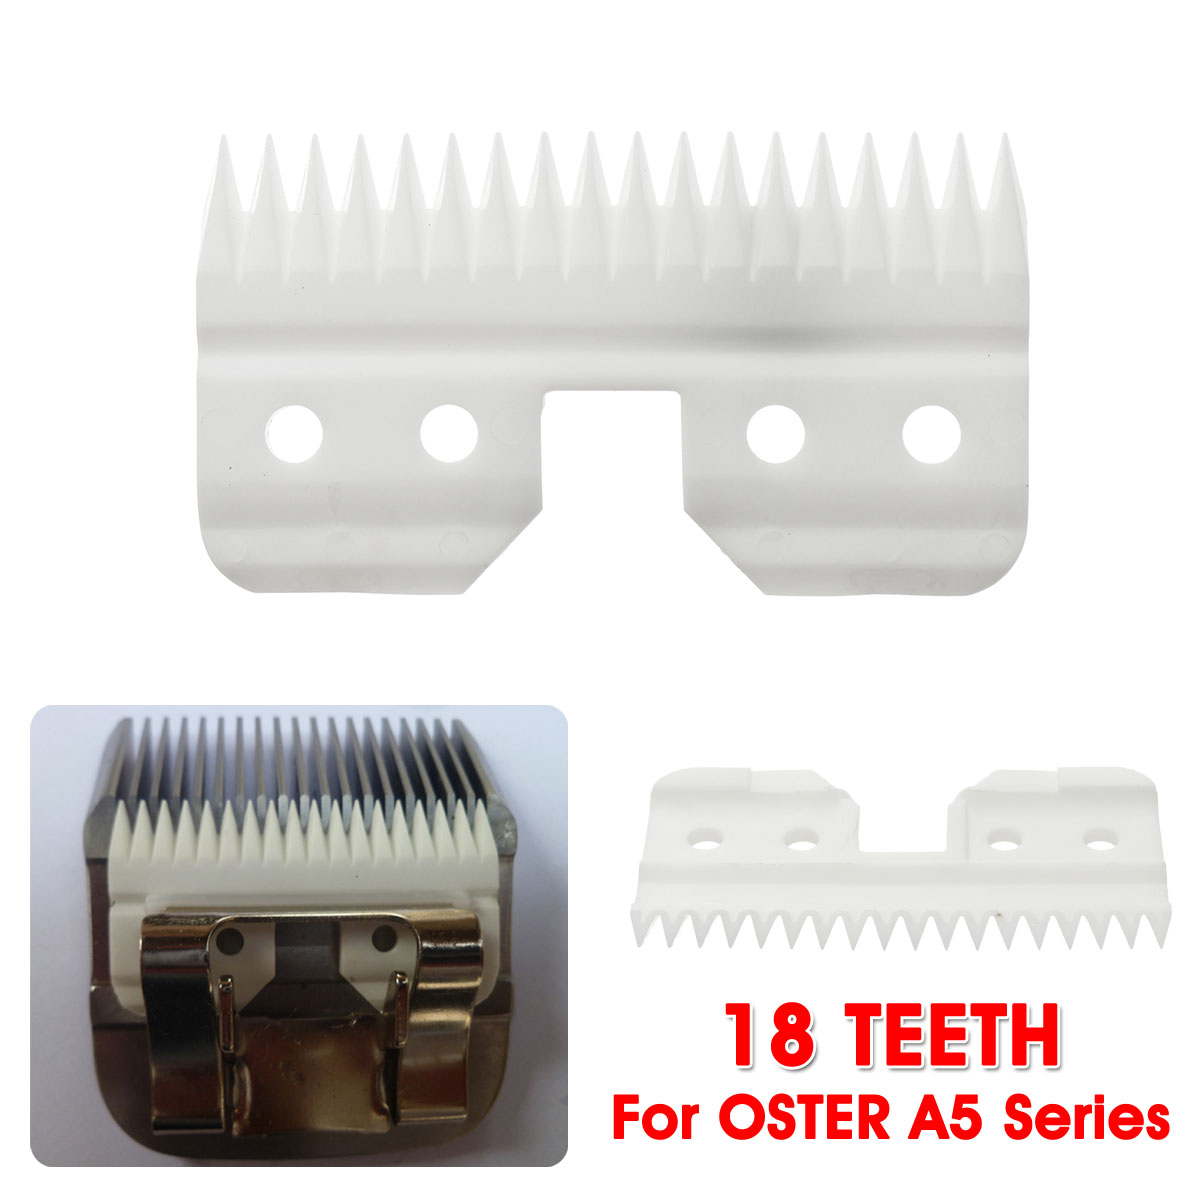 1x18-Teeth-Ceramic-Blade-Replacement-Accessories-For-OSTER-A5-Series-Clipper-Blades-Cutter-1561061-1